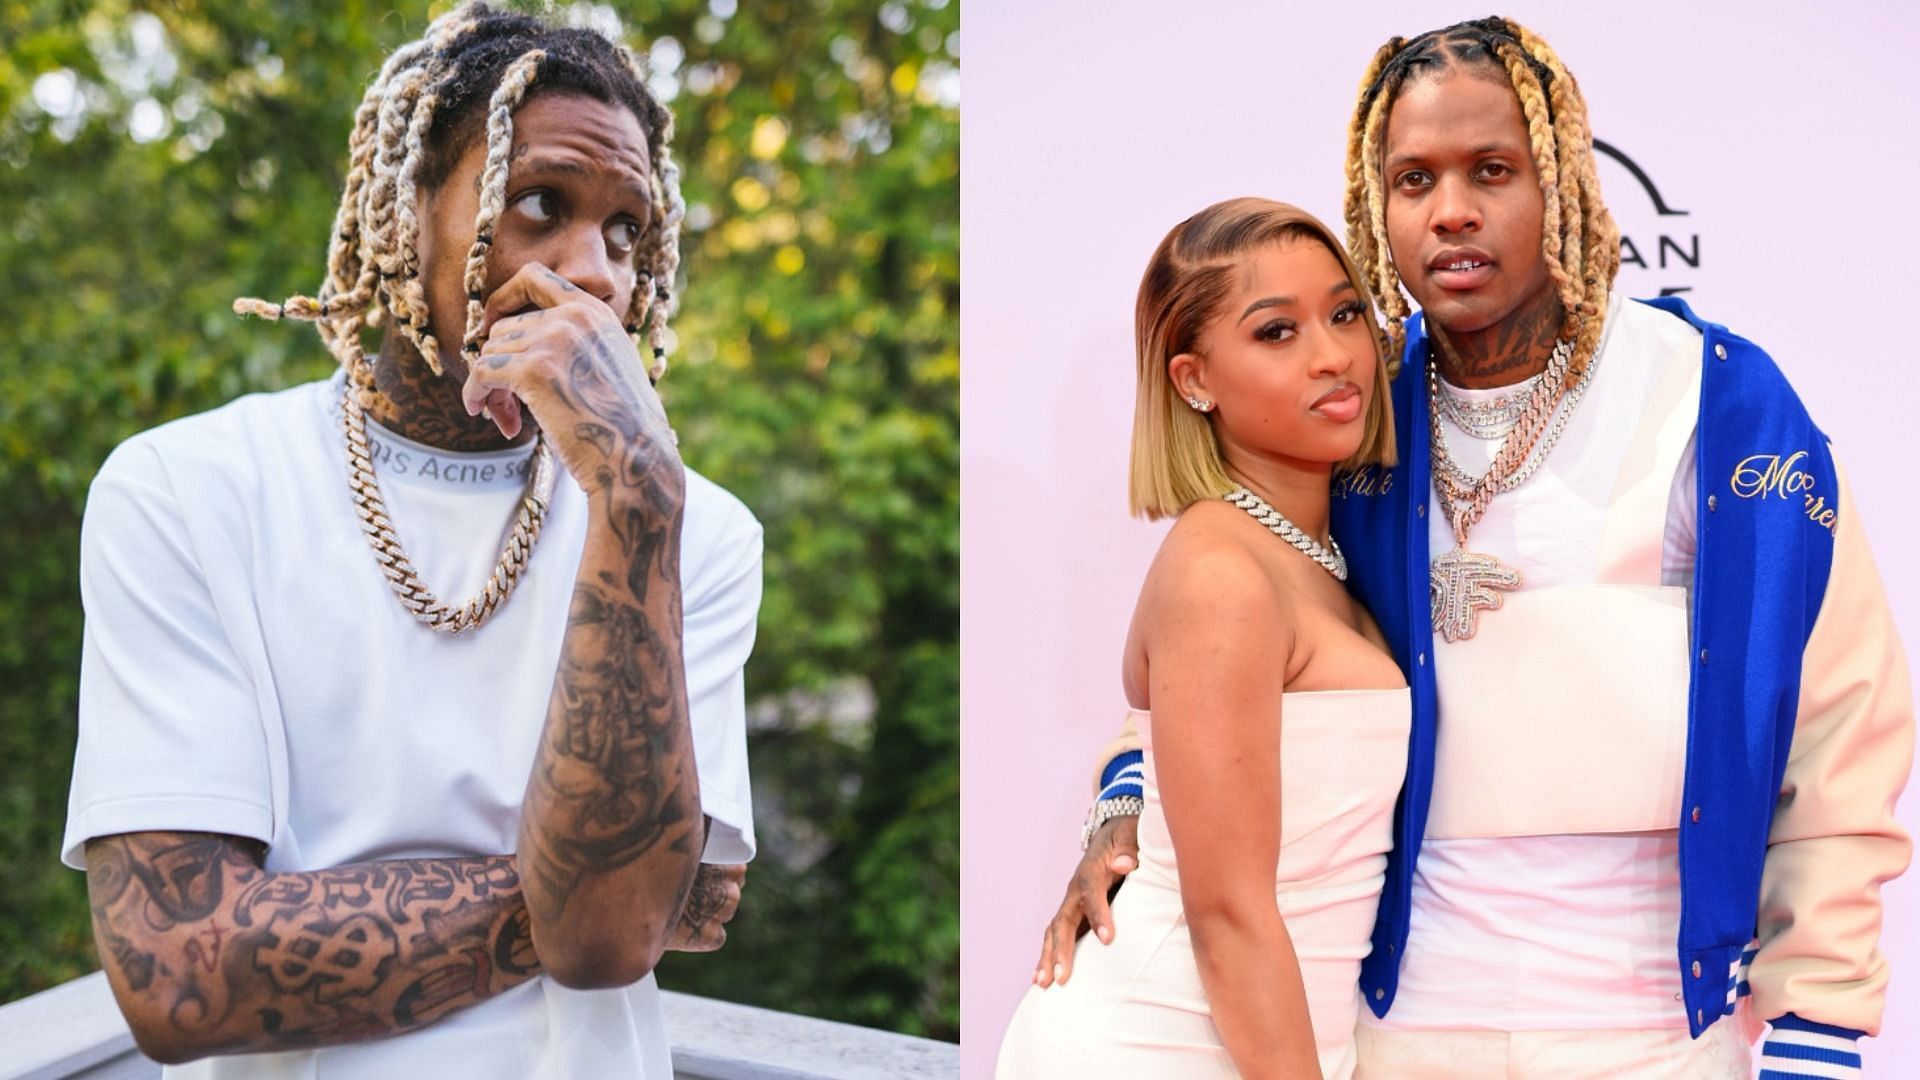 Lil Durk and India Royale sparked breakup rumors amid cheating allegations (Image via Getty Images)